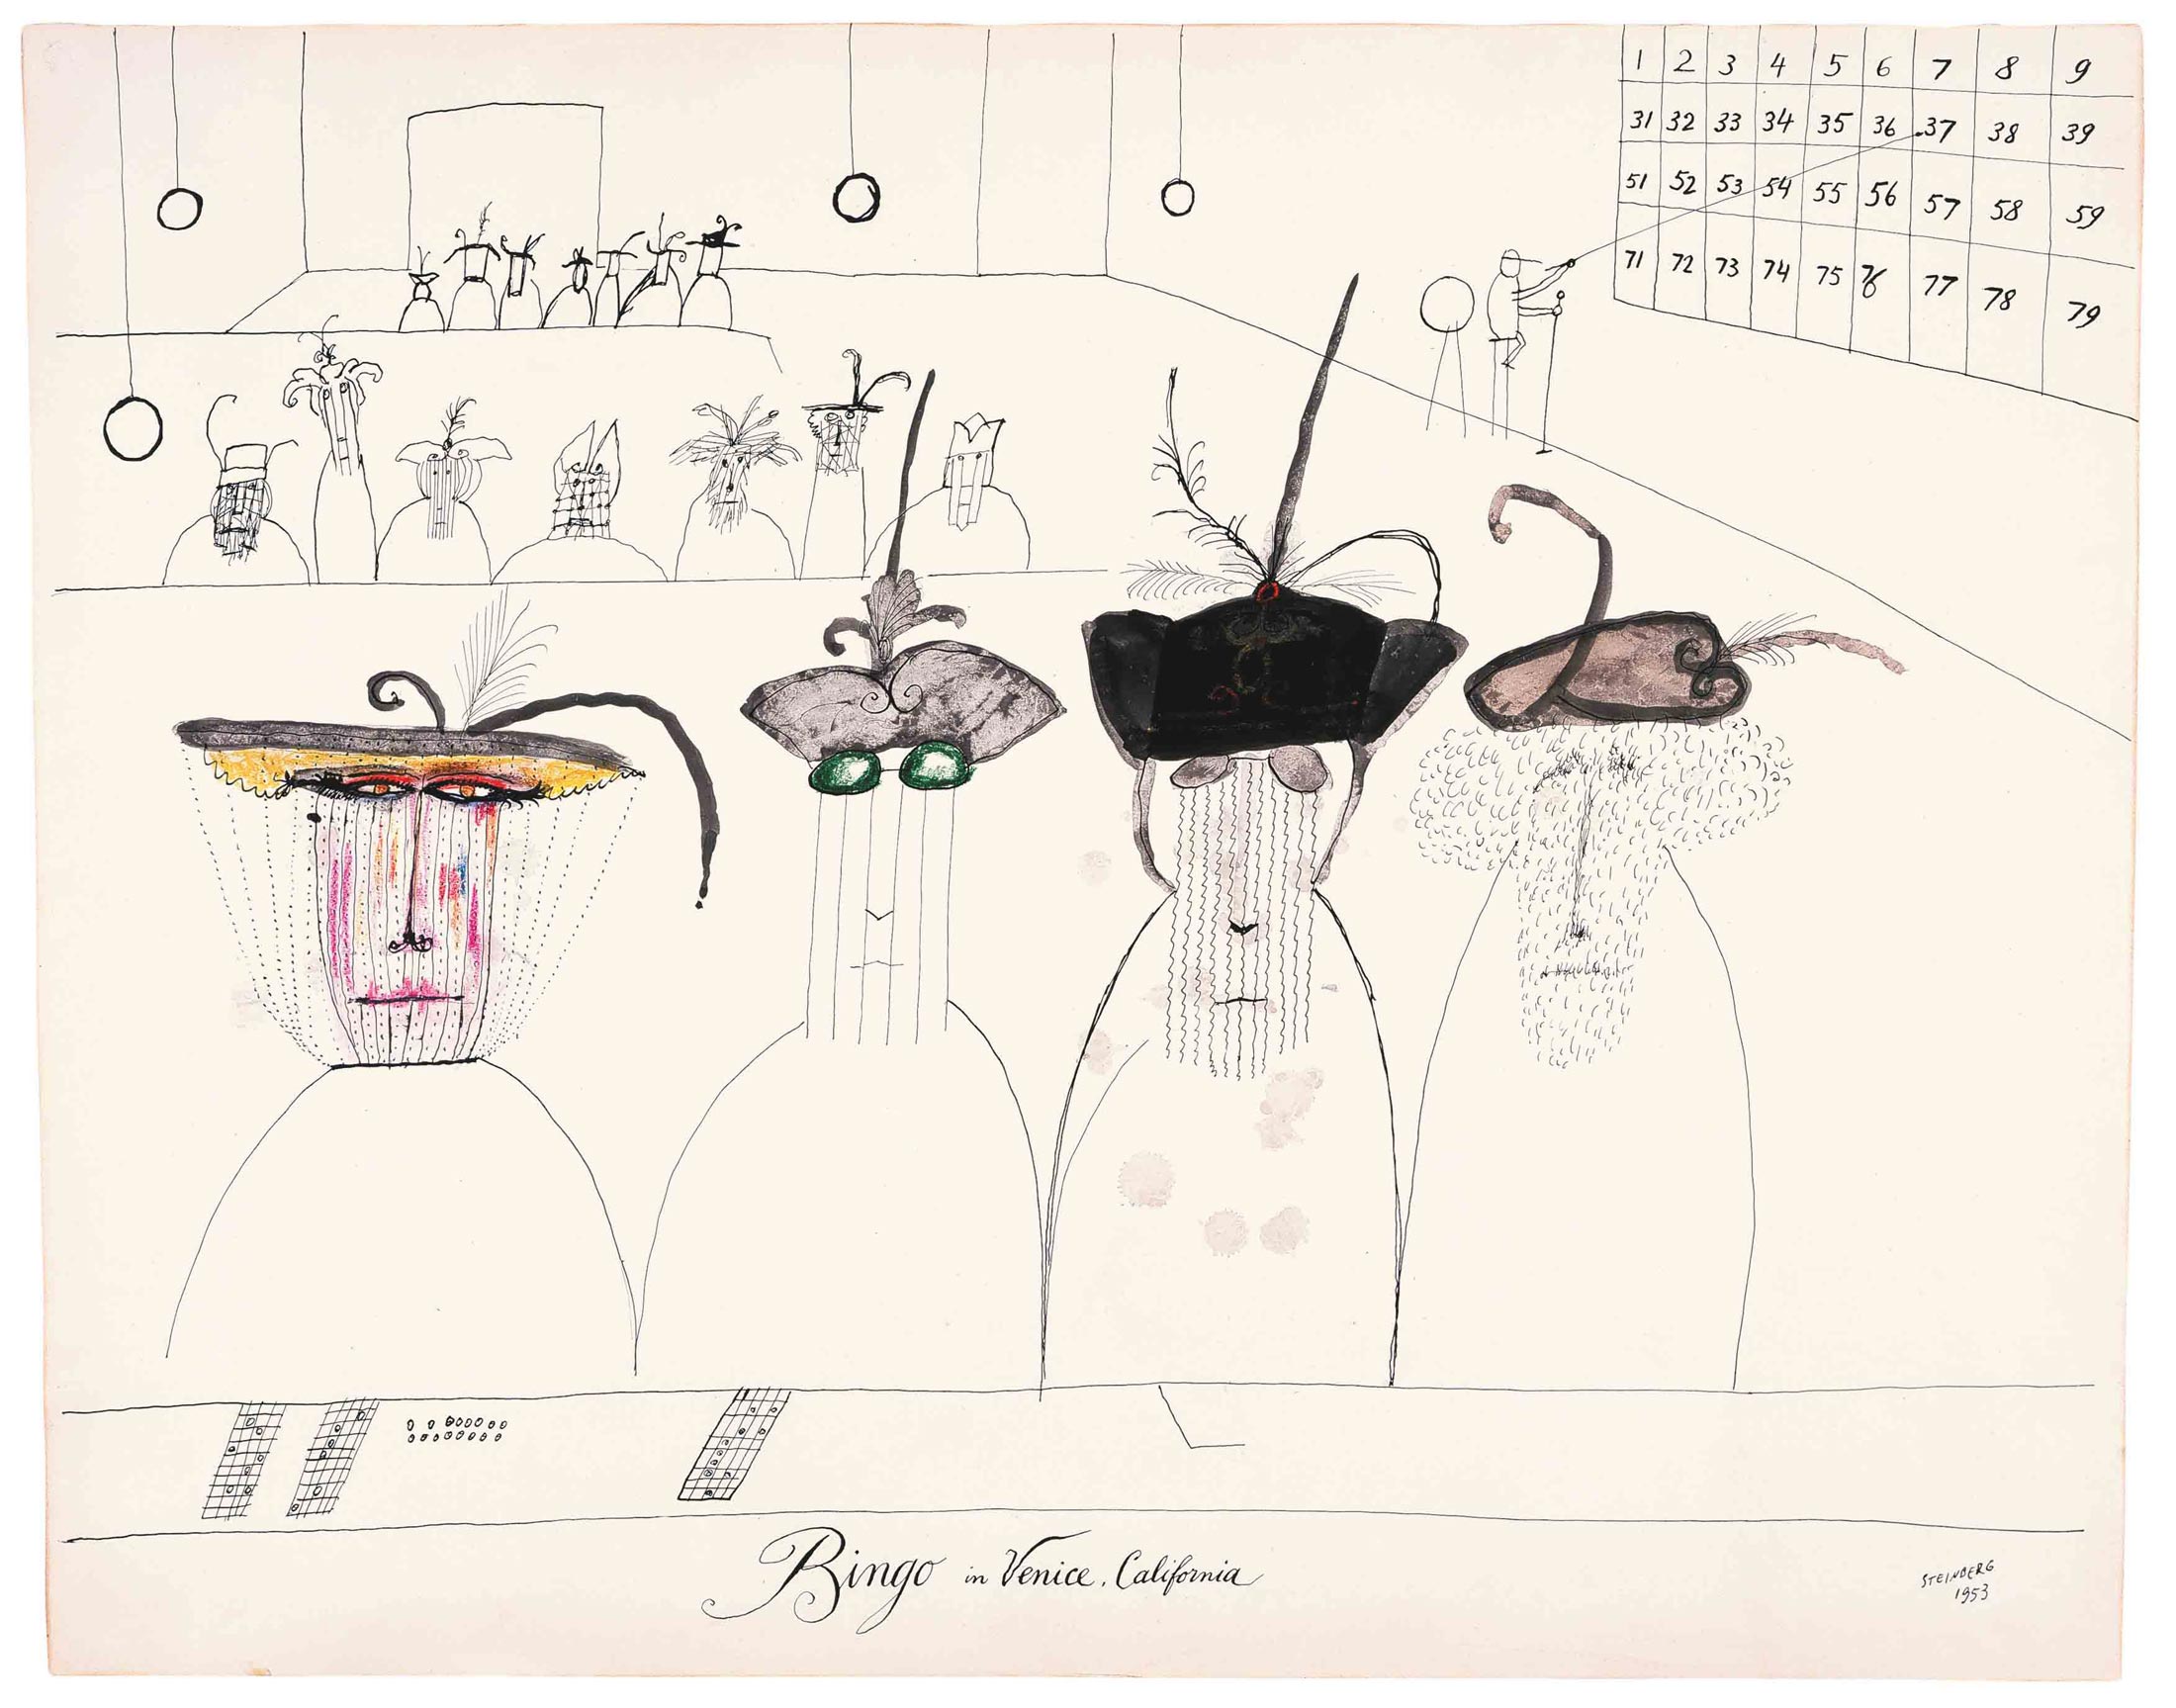 <em>Bingo in Venice California</em>, 1953. Ink, crayon, and watercolor on paper, 22 ¾ x 28 ¾ in. National Gallery of Art, Washington, DC; Gift of The Saul Steinberg Foundation.